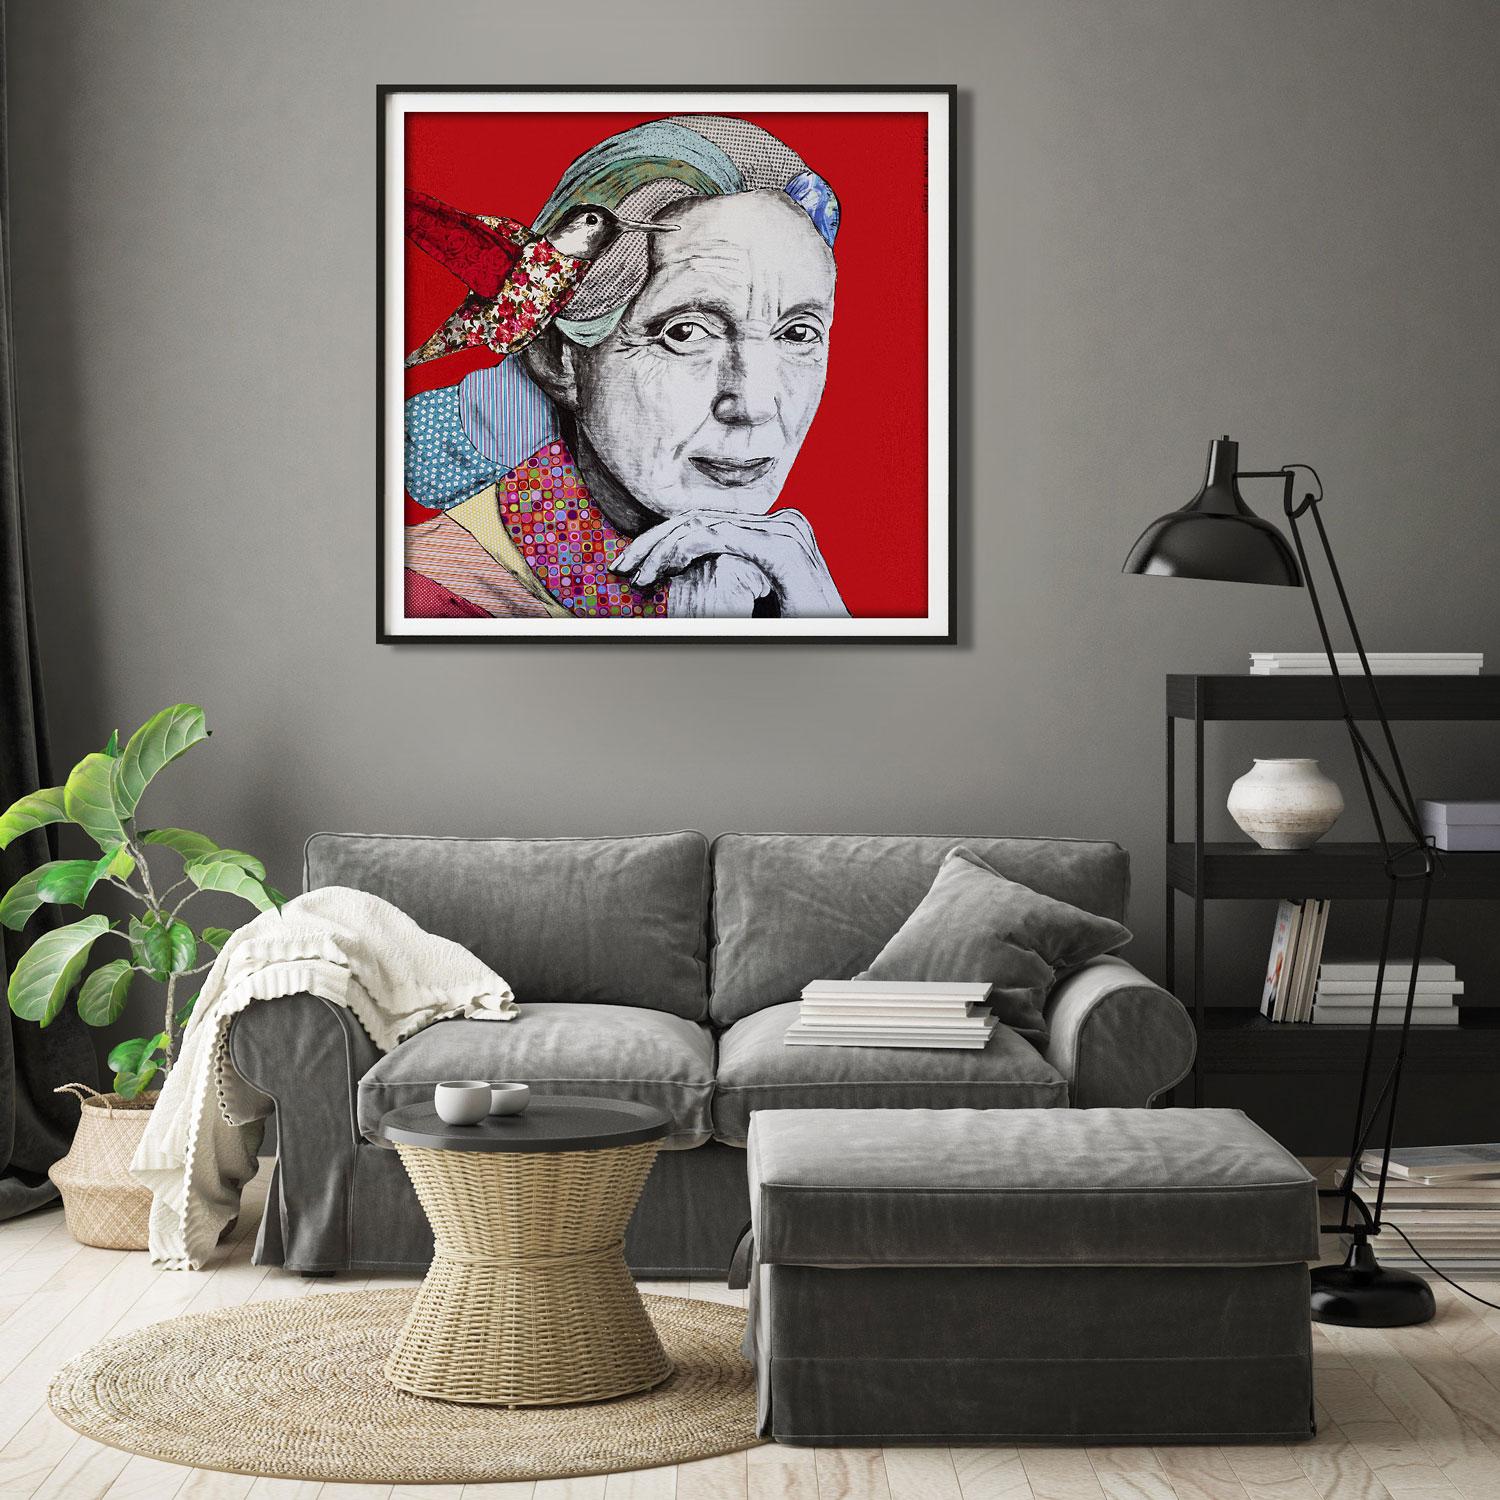 Animal Print - Gillie and Marc - Art - Limited Edition - Women - Equality Jane - Painting by Gillie and Marc Schattner